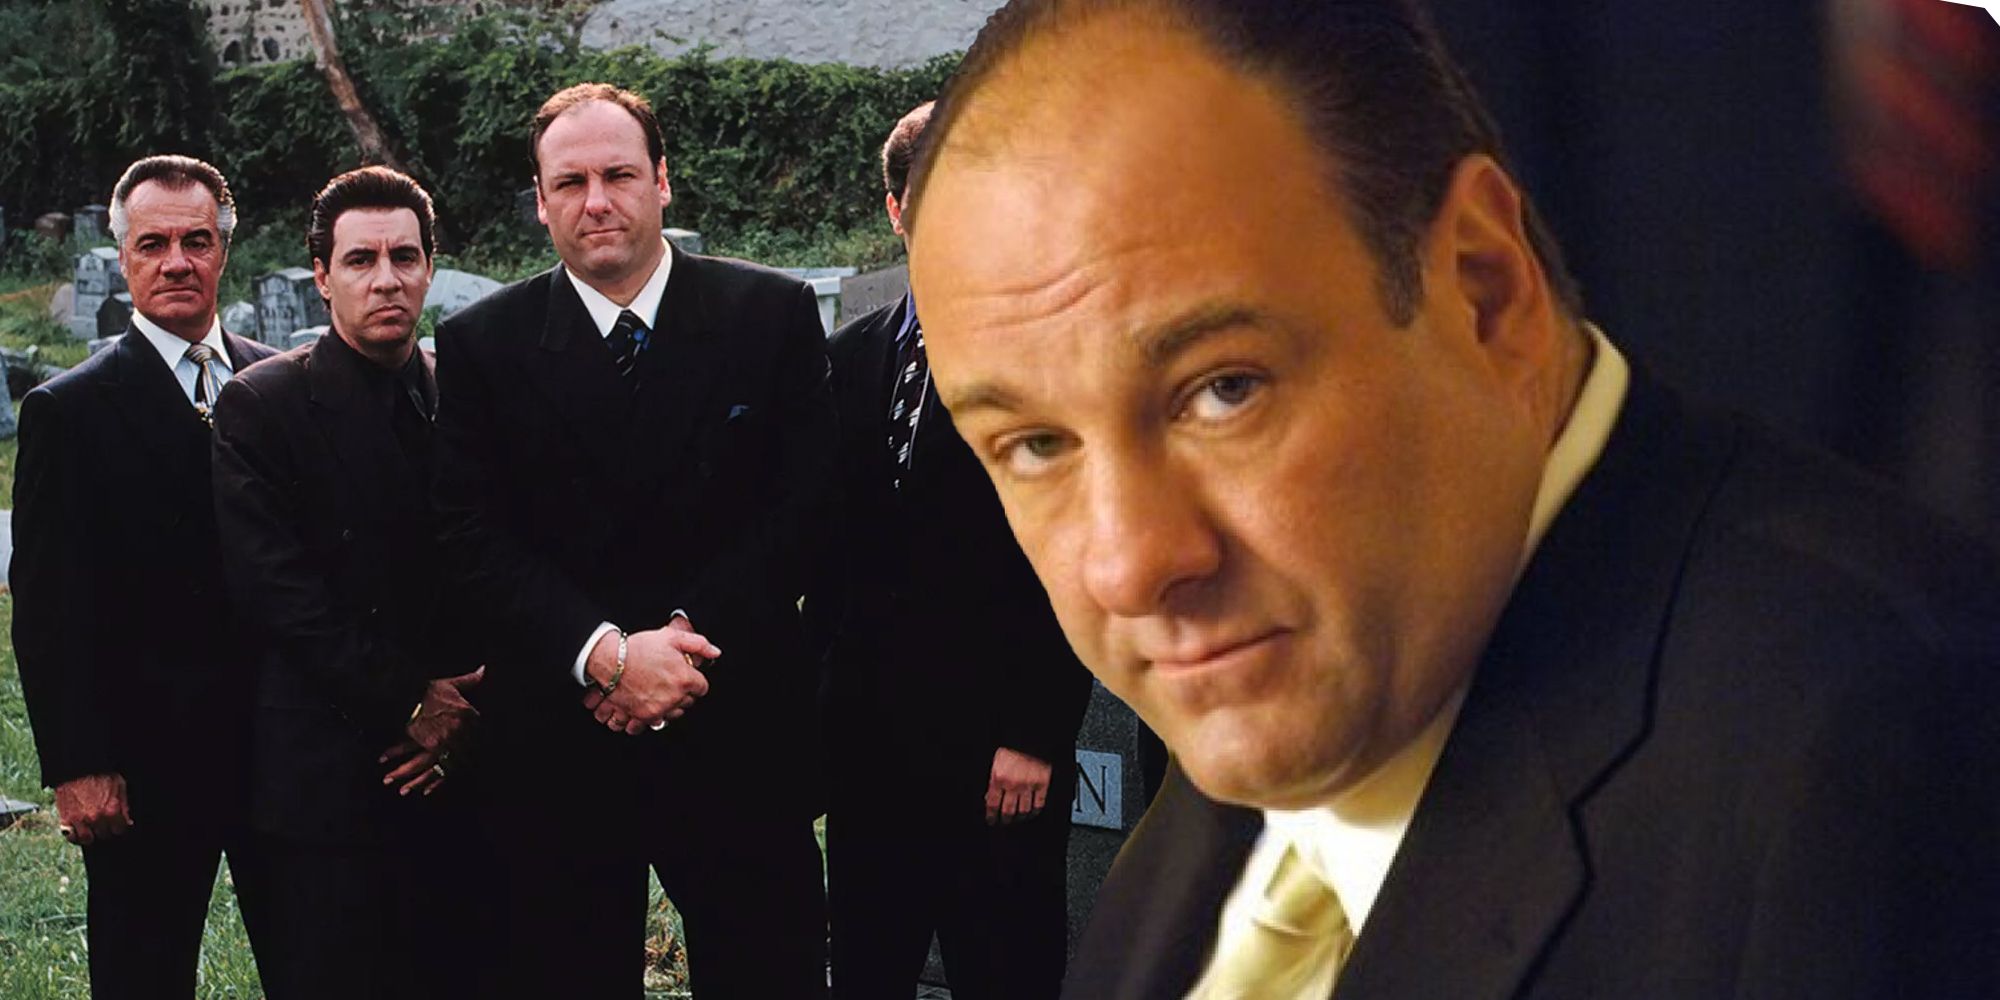 Tony Soprano and the members of his crime family